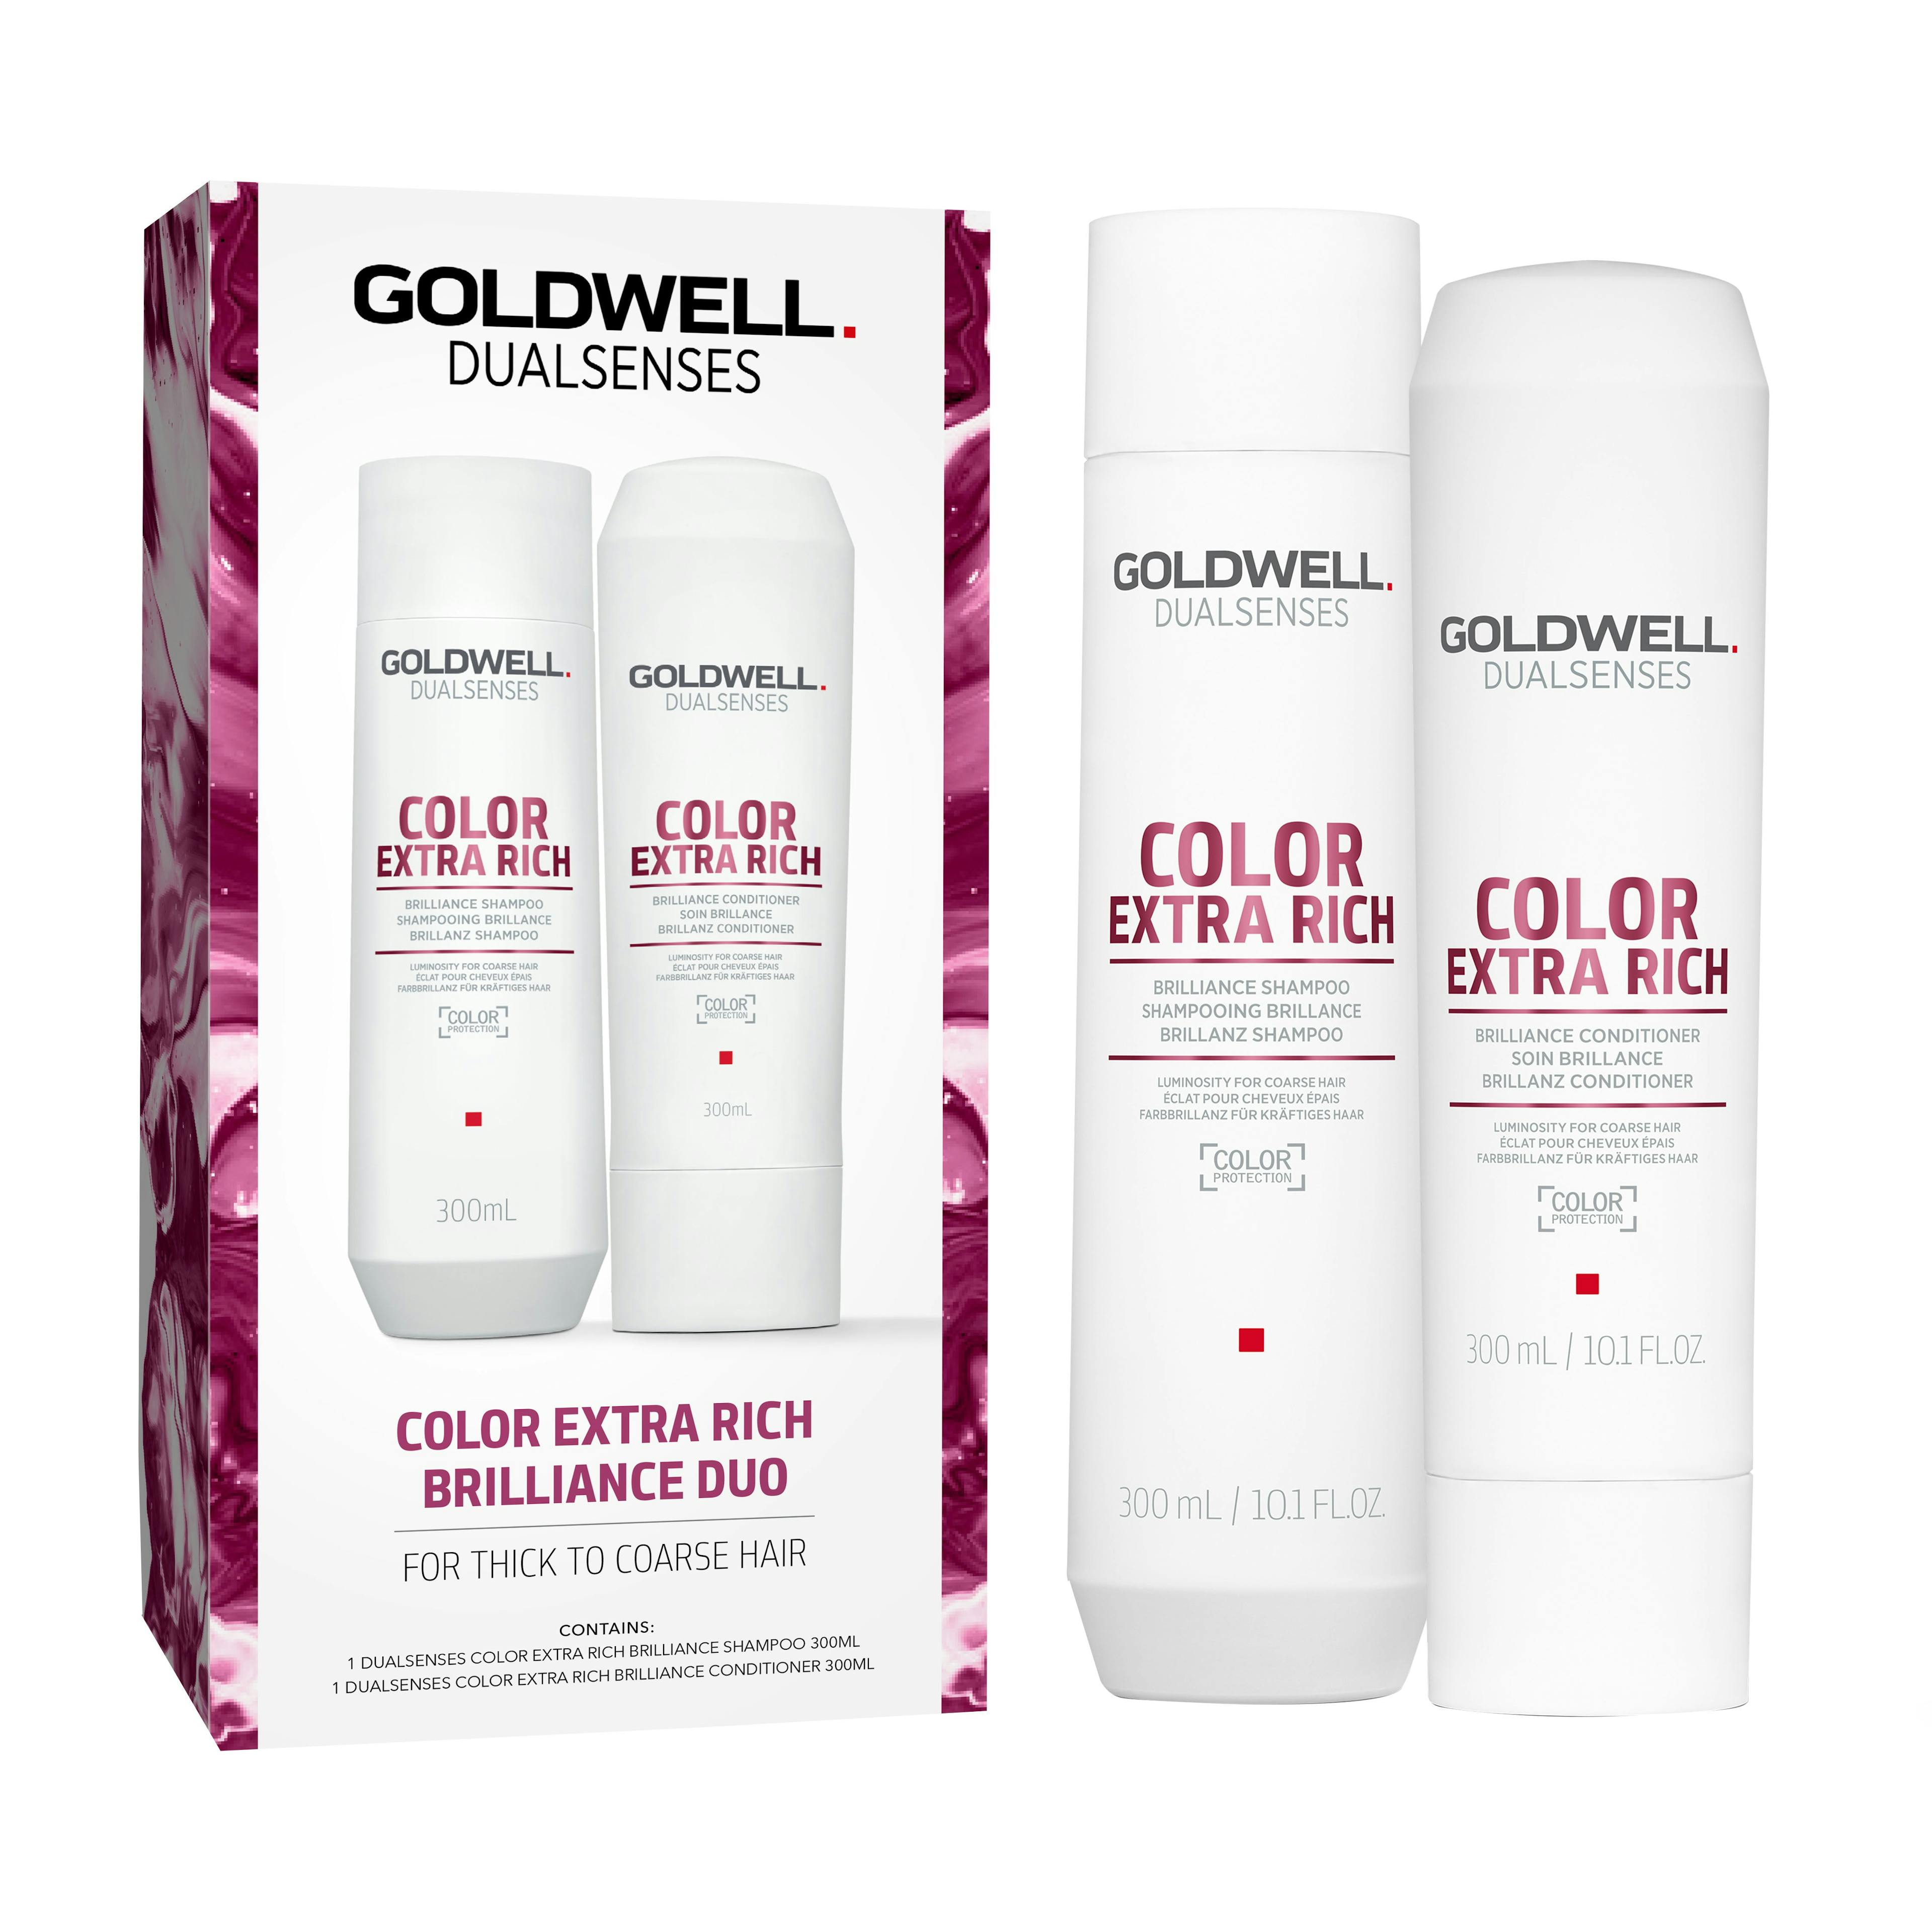 Goldwell Dualsenses Color Extra Rich Duo Pack